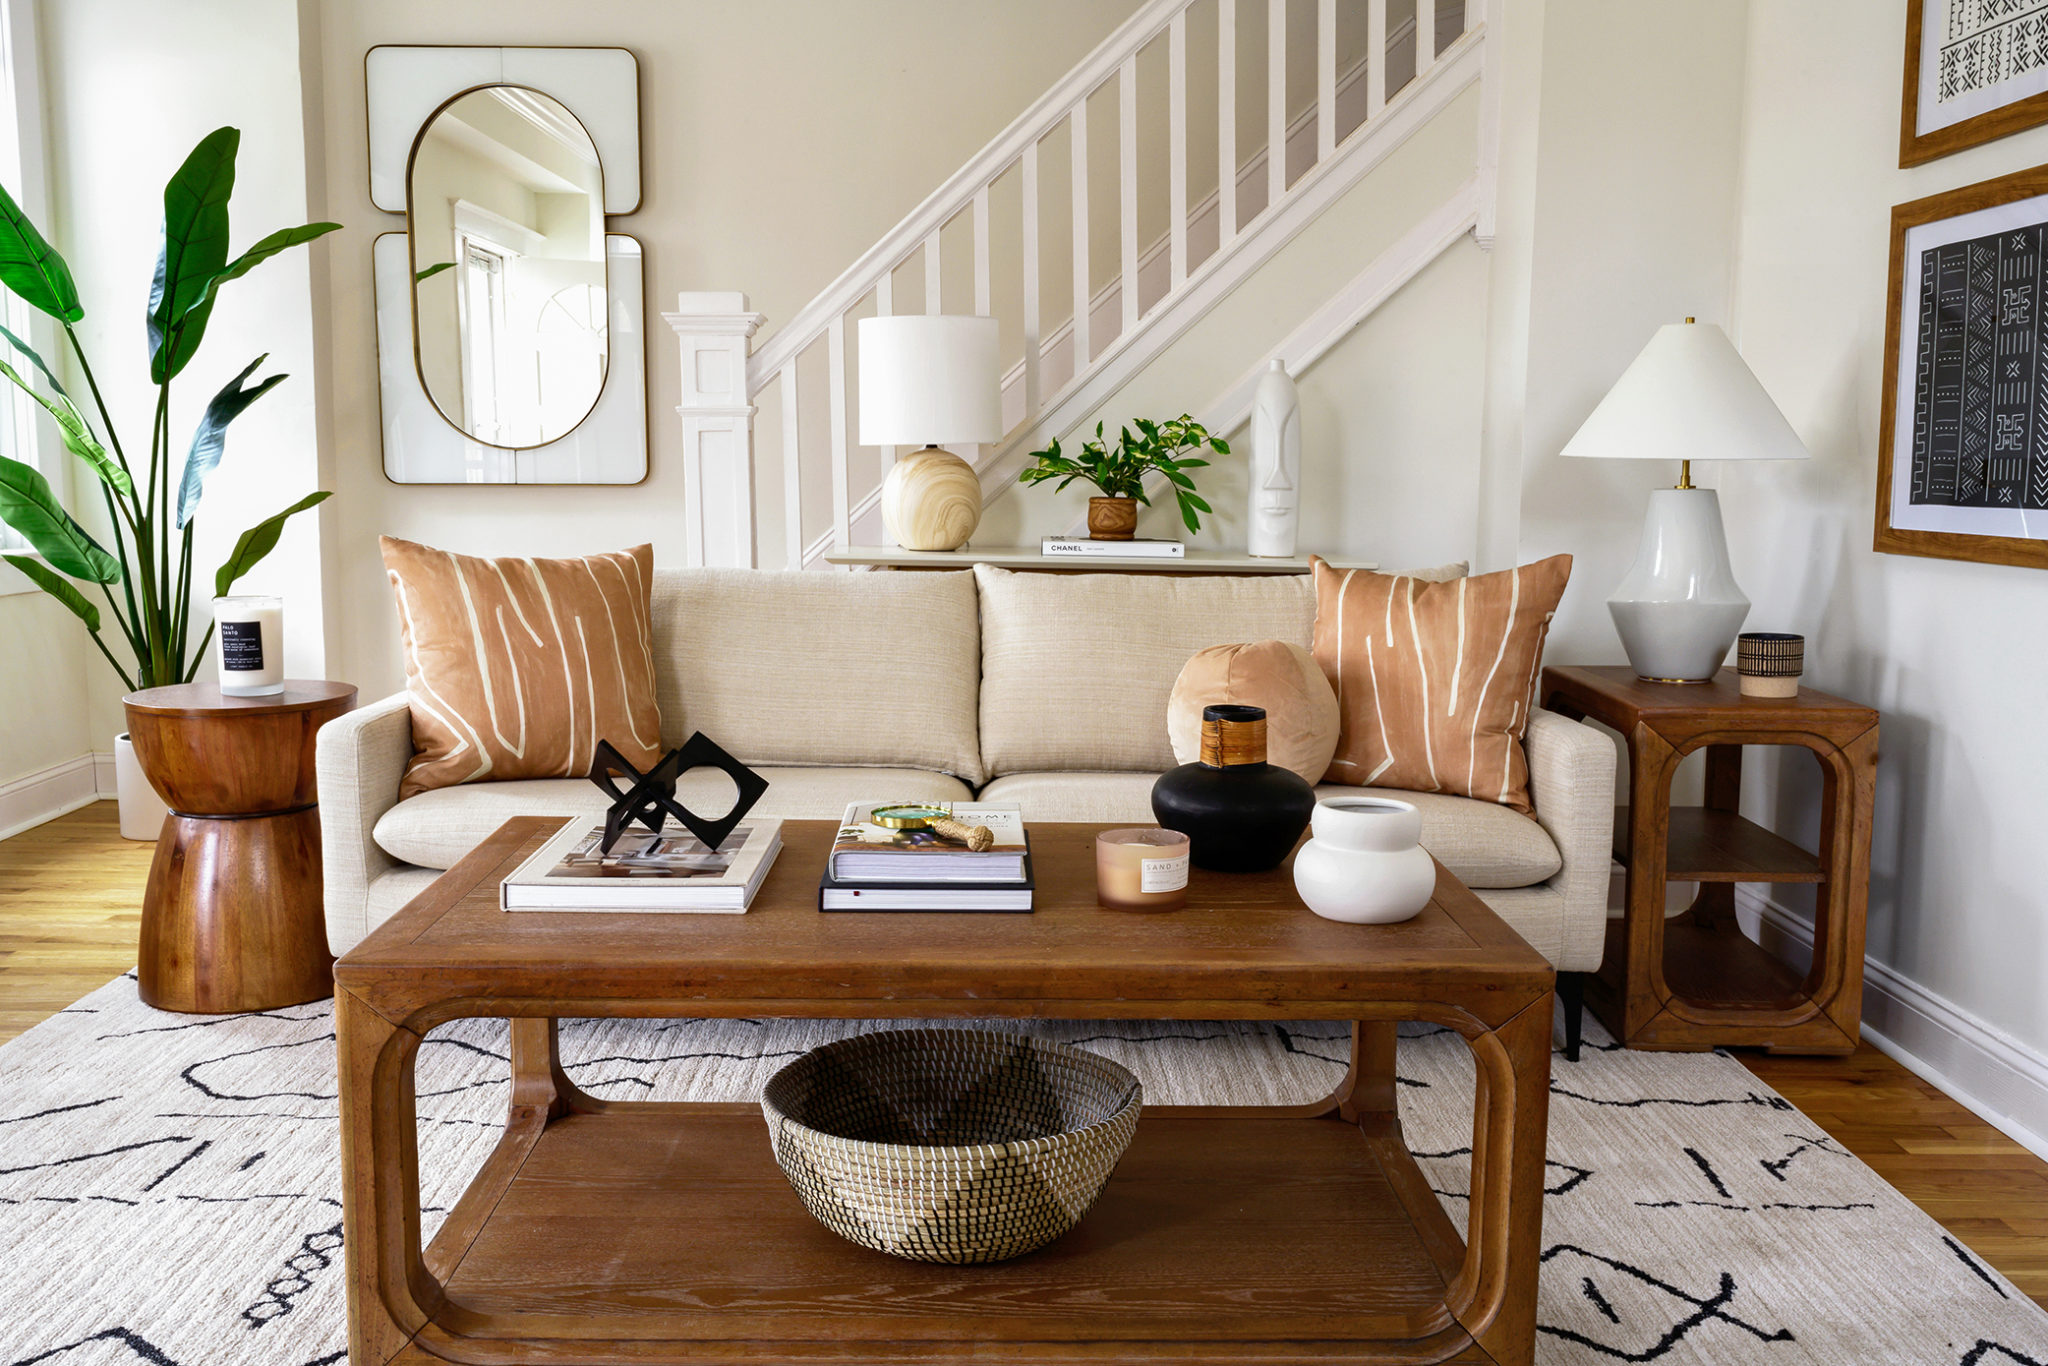 Decorating After the Holidays: How To Get Your Home Ready for Spring